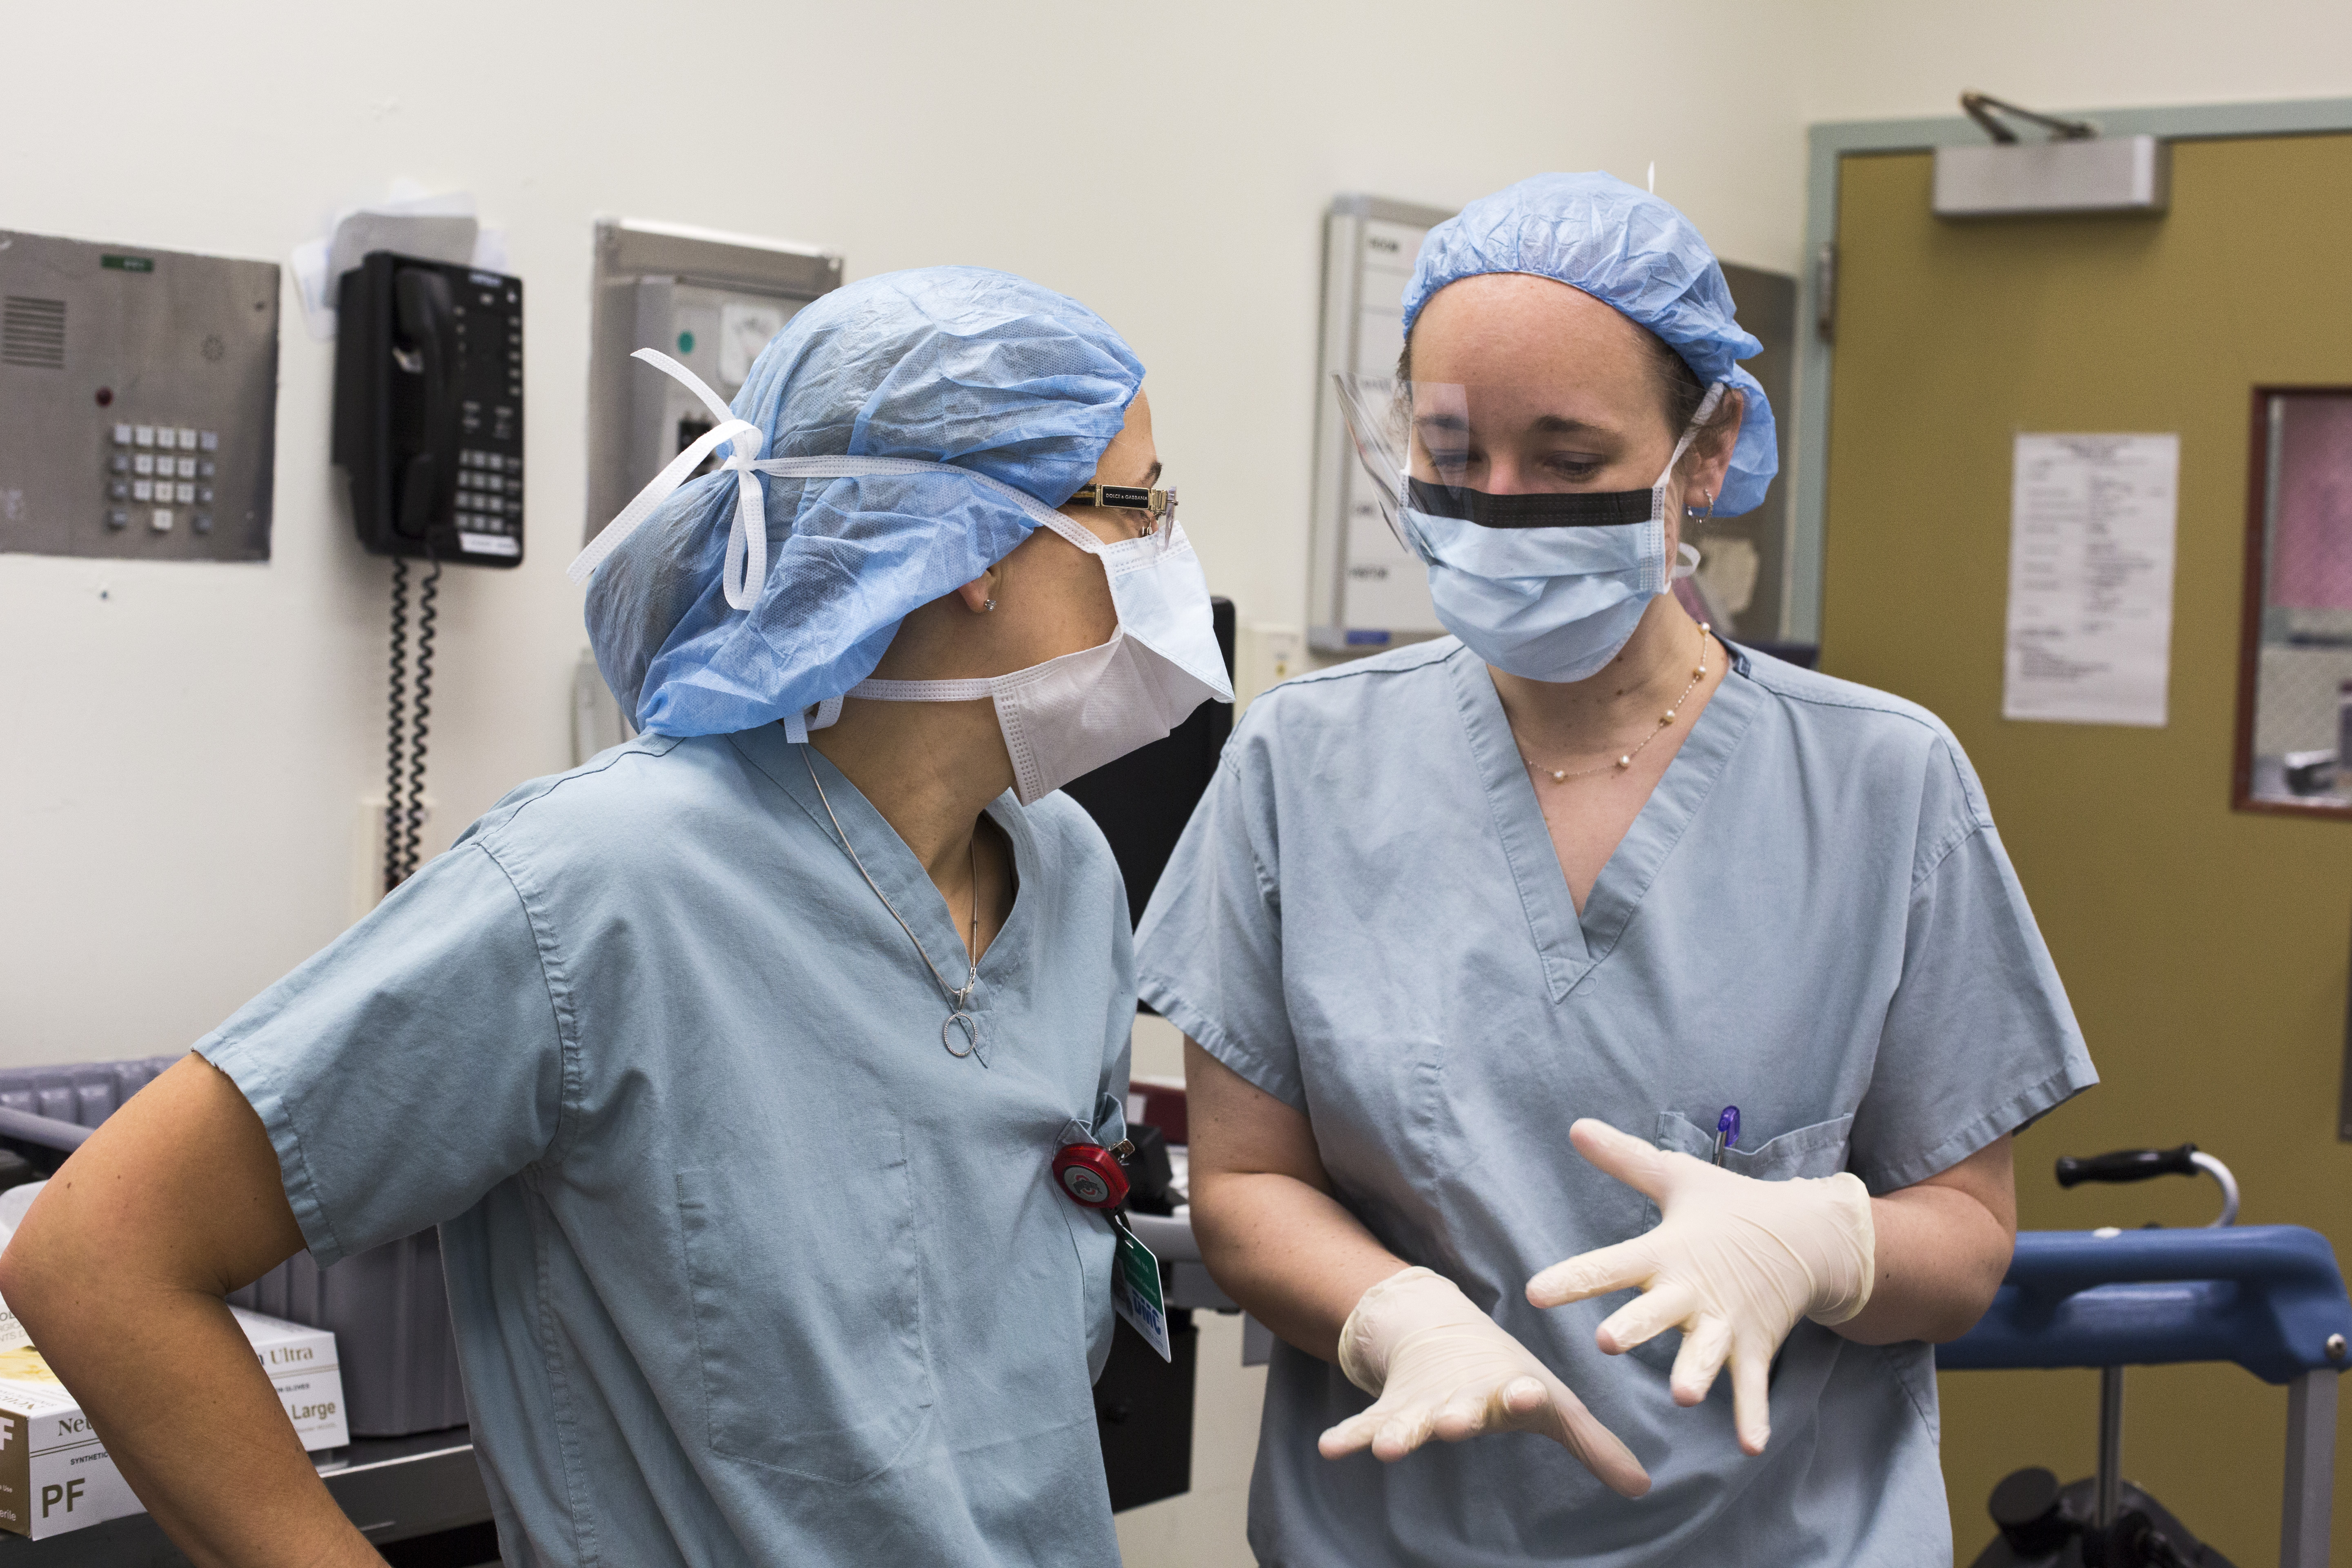 Hospital workers talk in an operating room